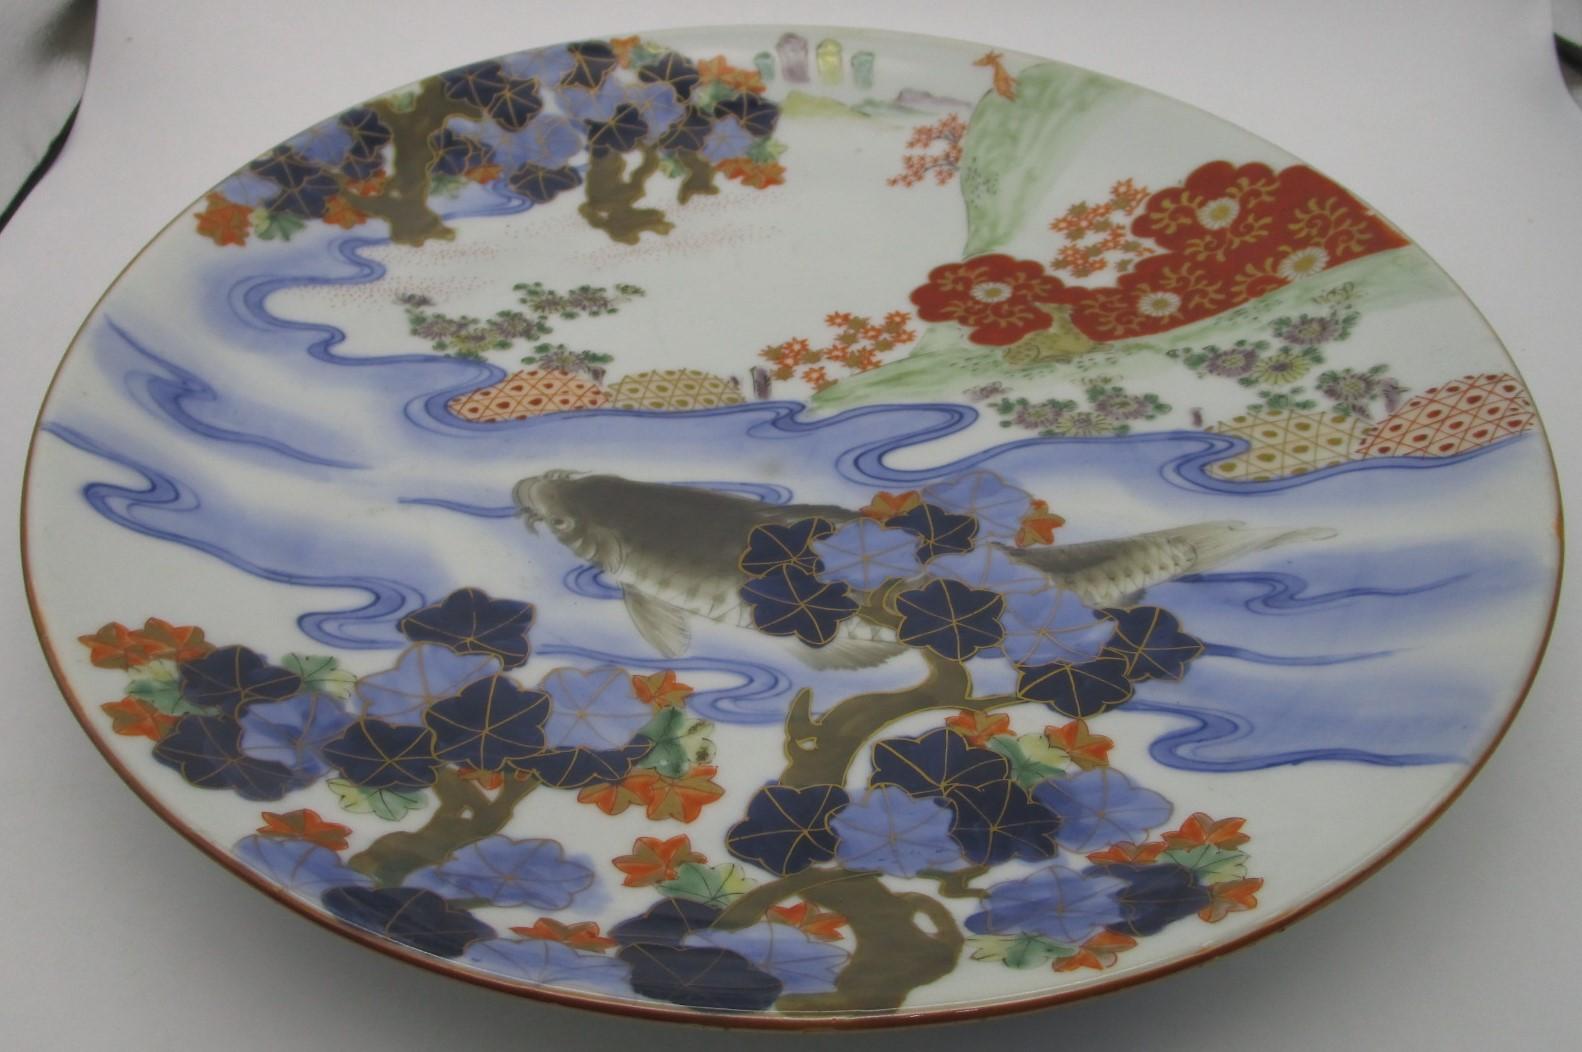 Unique Japanese large Imari Meiji period porcelain charger in iron-red, cobalt blue and green. It showcases a dramatic scene with a bold koi fish in deep green swimming in a river in underglaze cobalt blue, decorating the center part of the charger